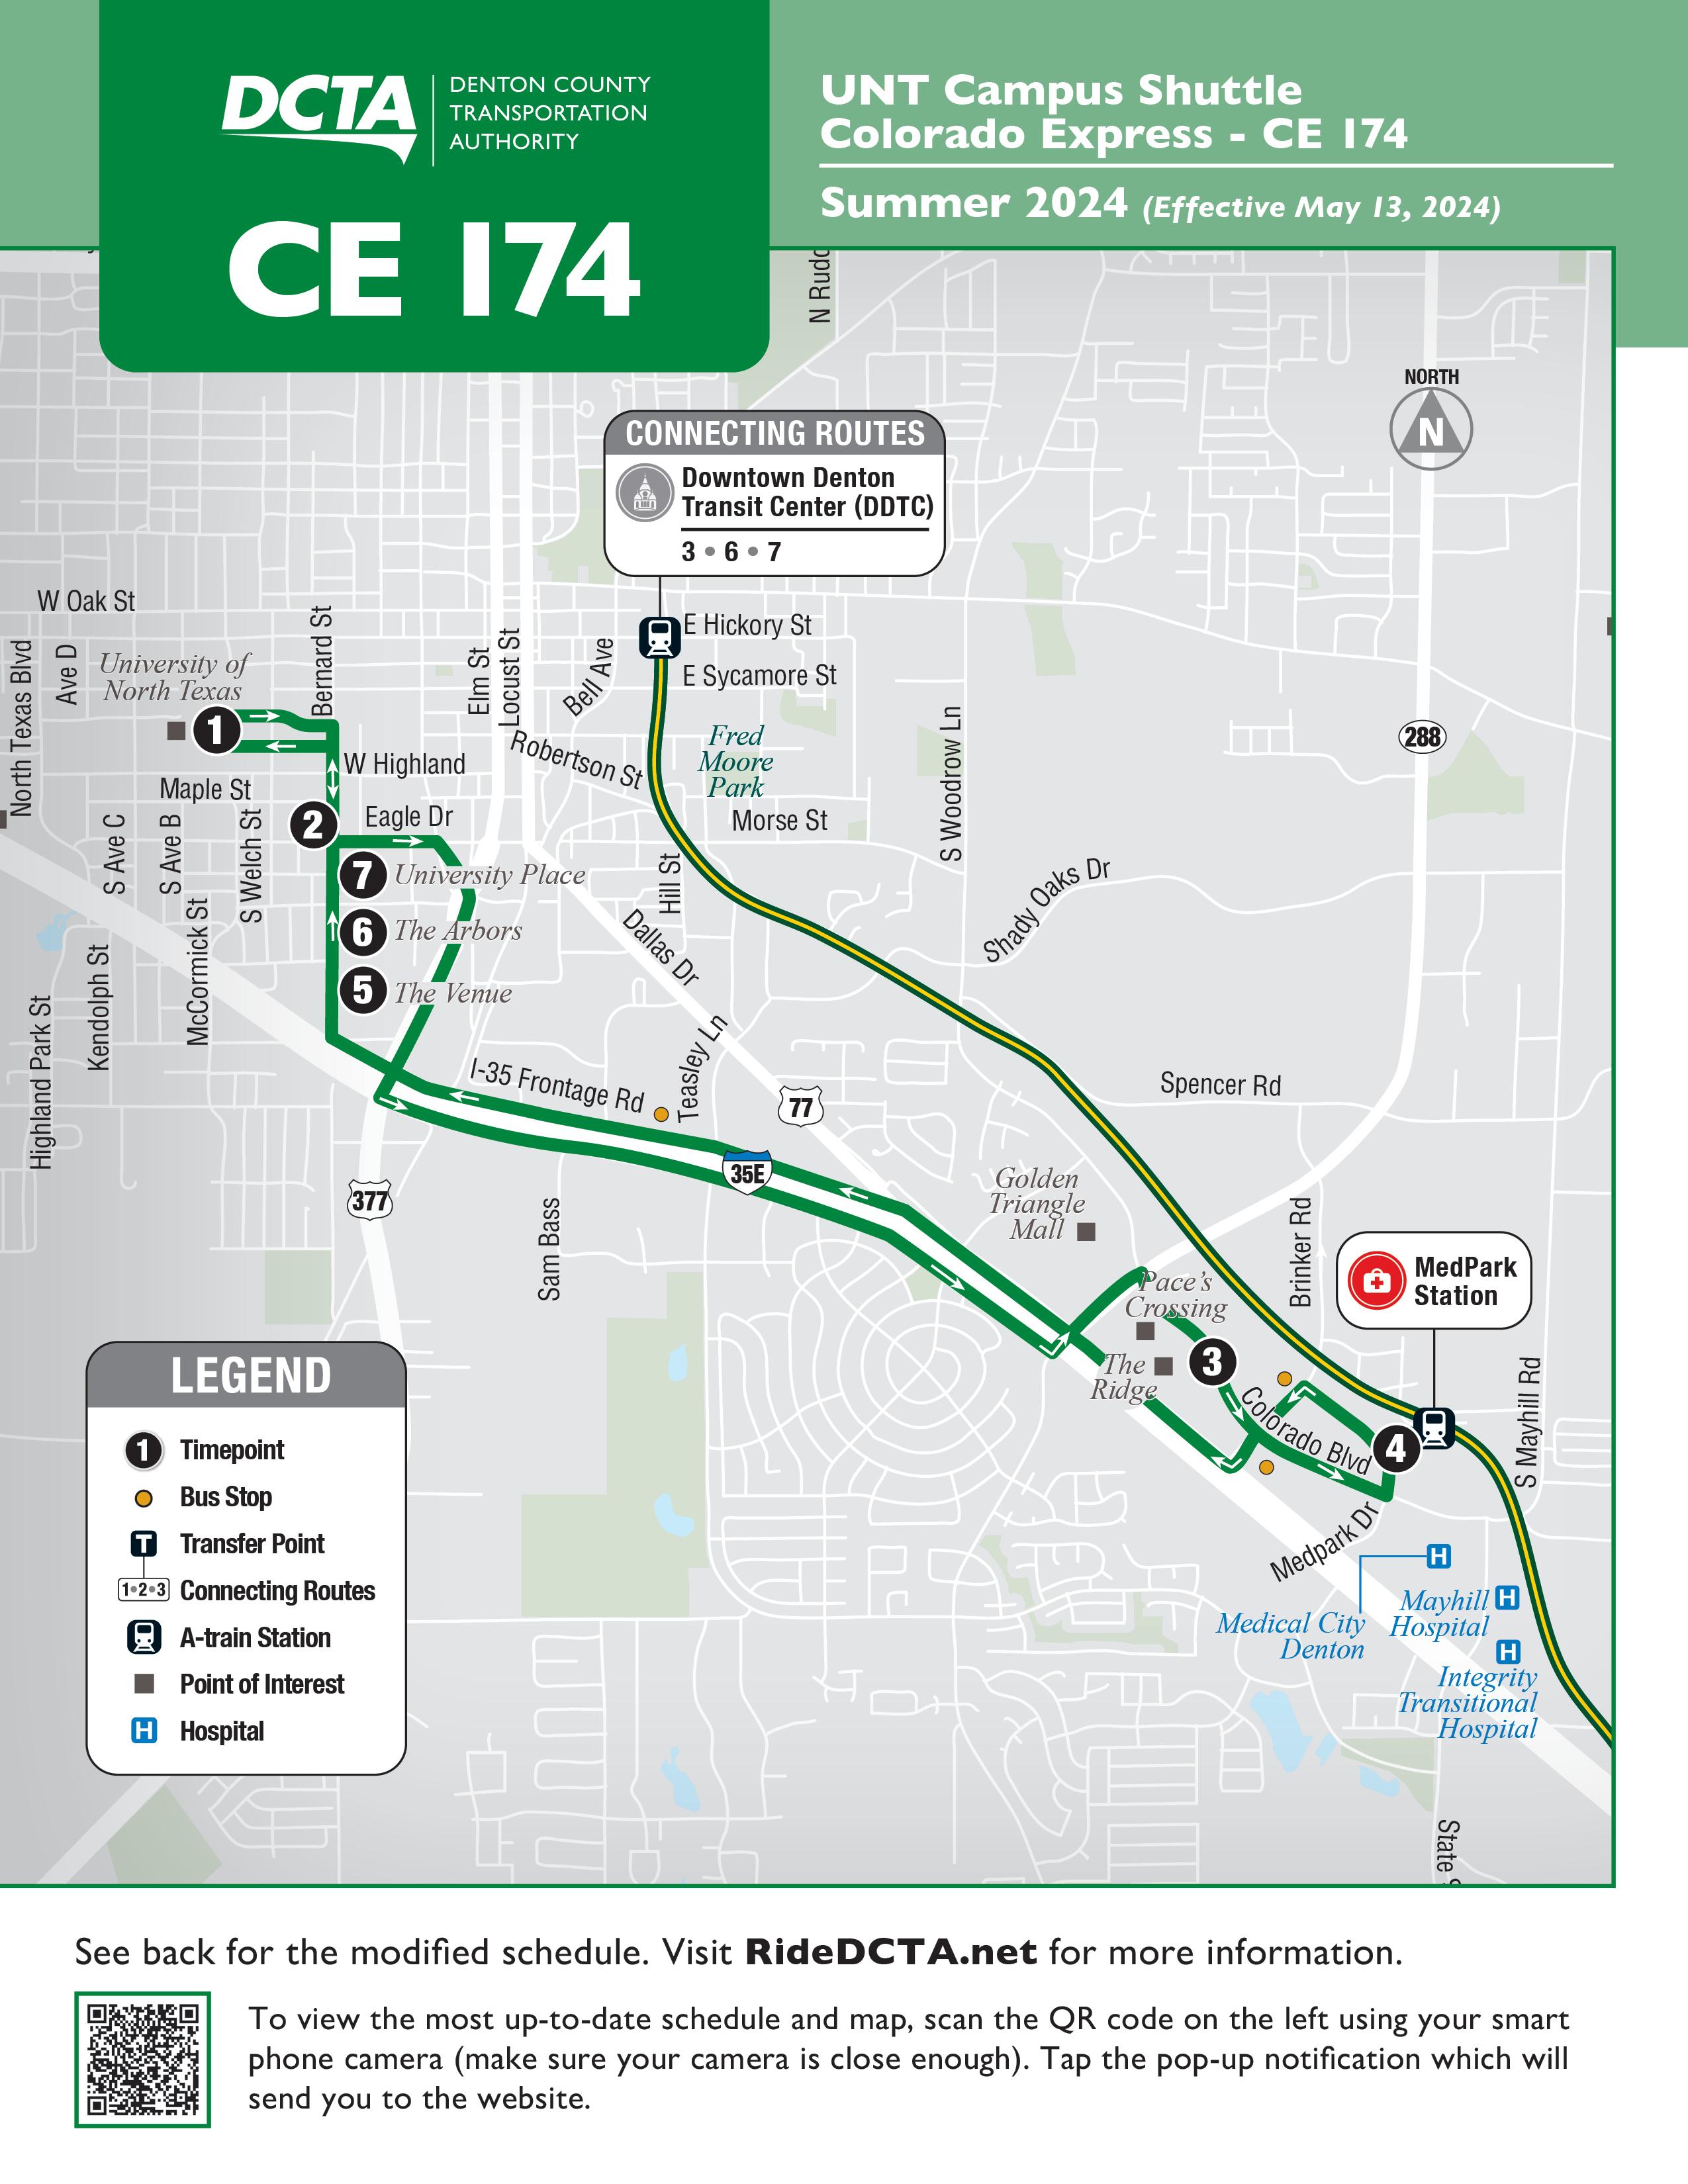 CE 174 Summer Route FY24 Map